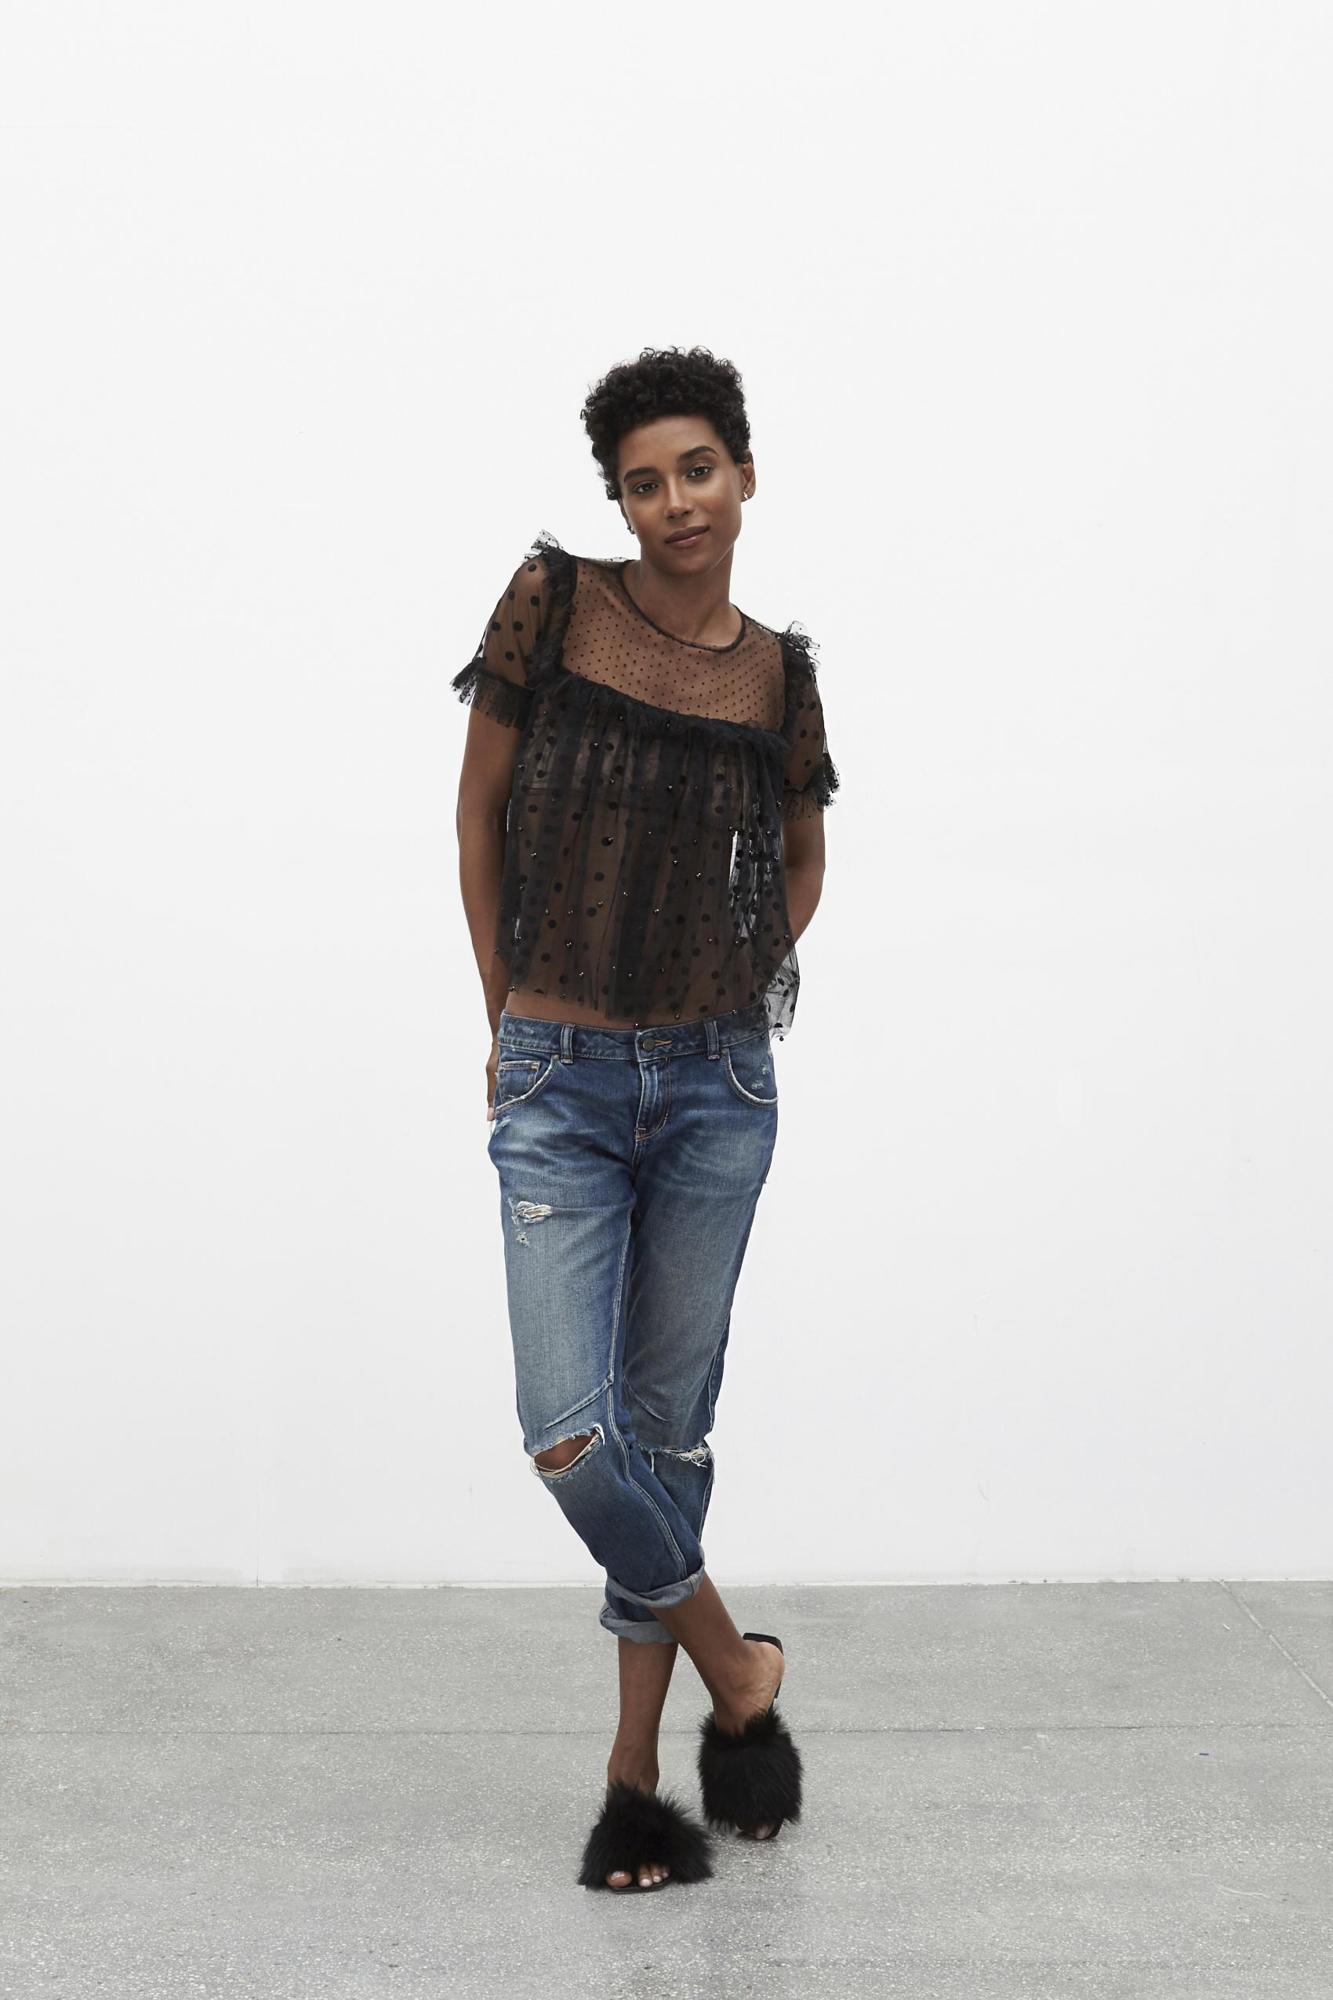 The Kebero New York top will be available at Clever Rose, $255.